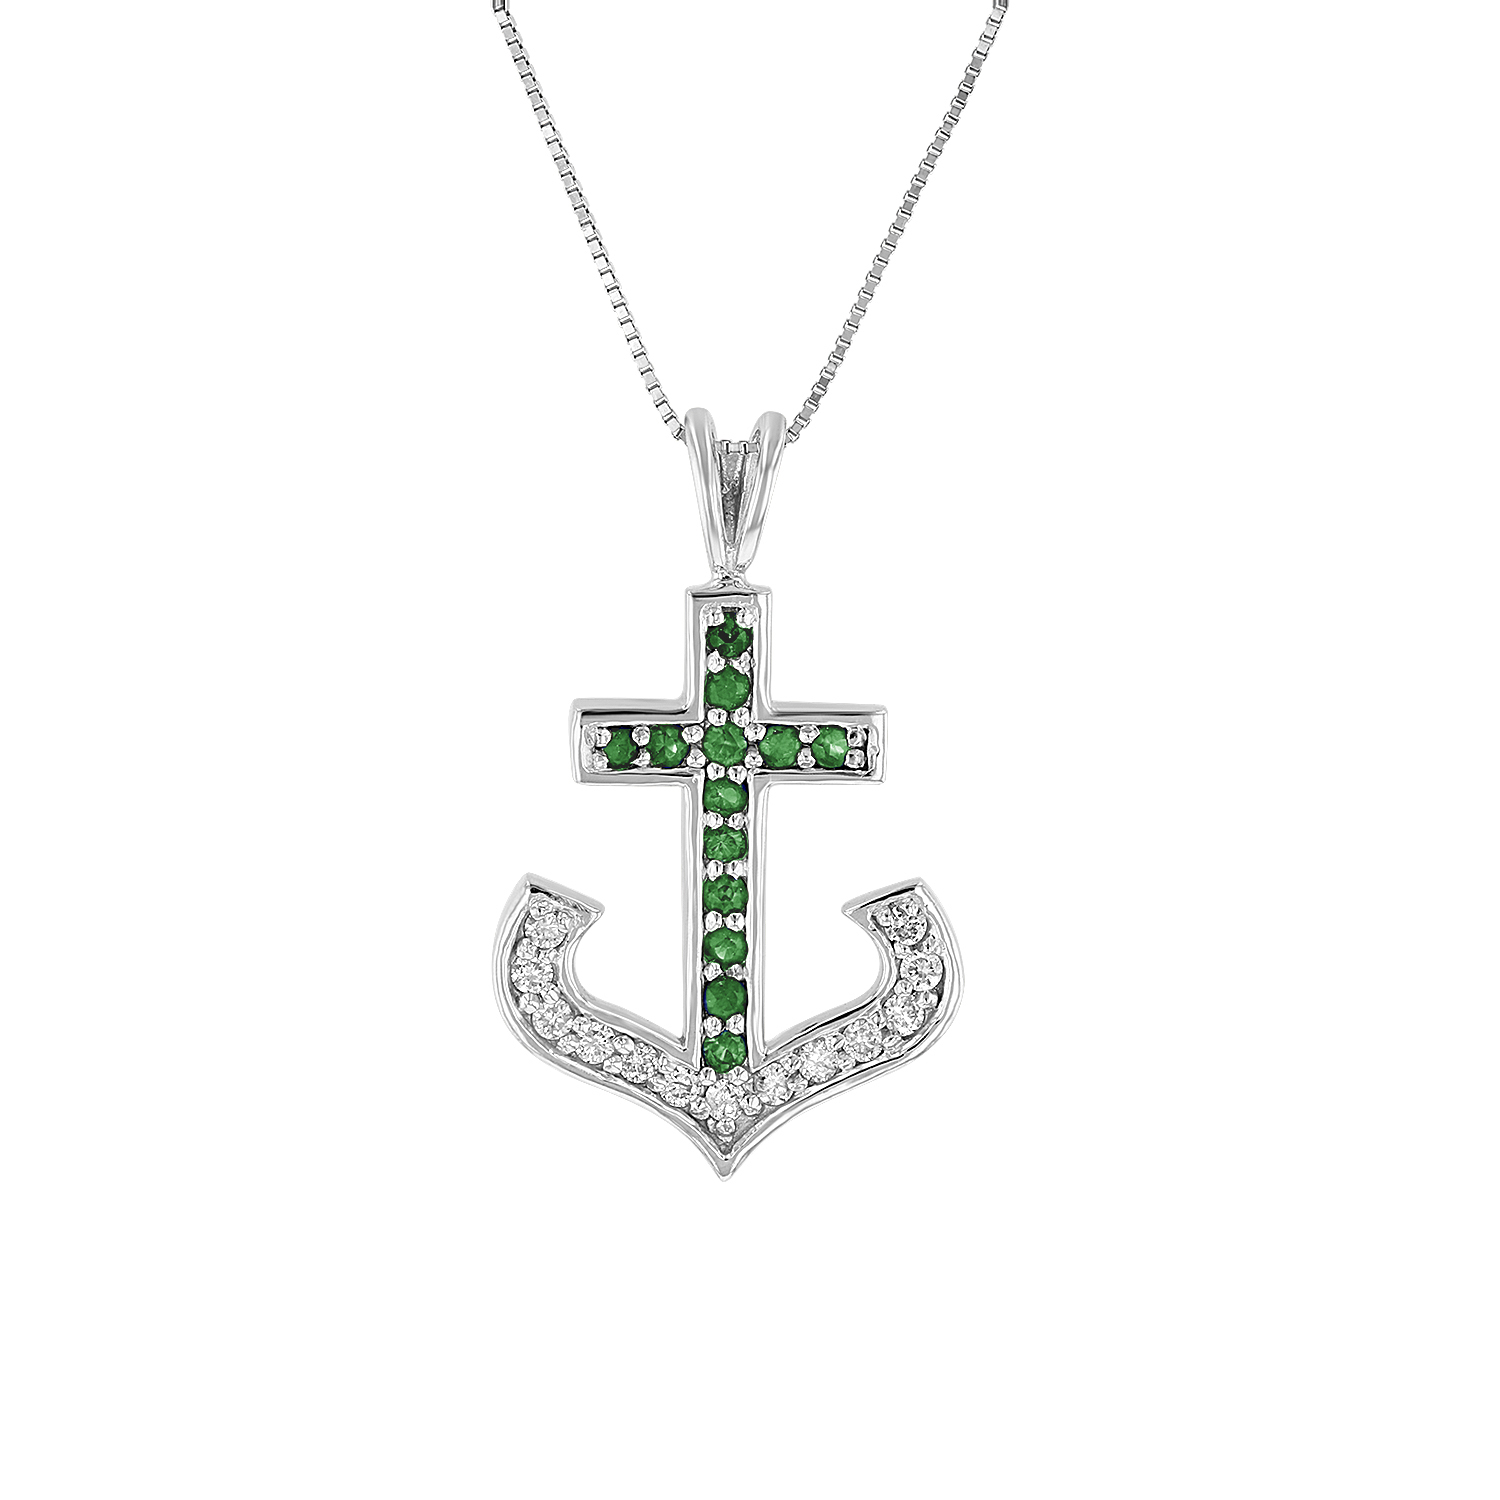 View 0.50ctw Diamond and Emerald Anchor Cross Pendant in 14k White Gold